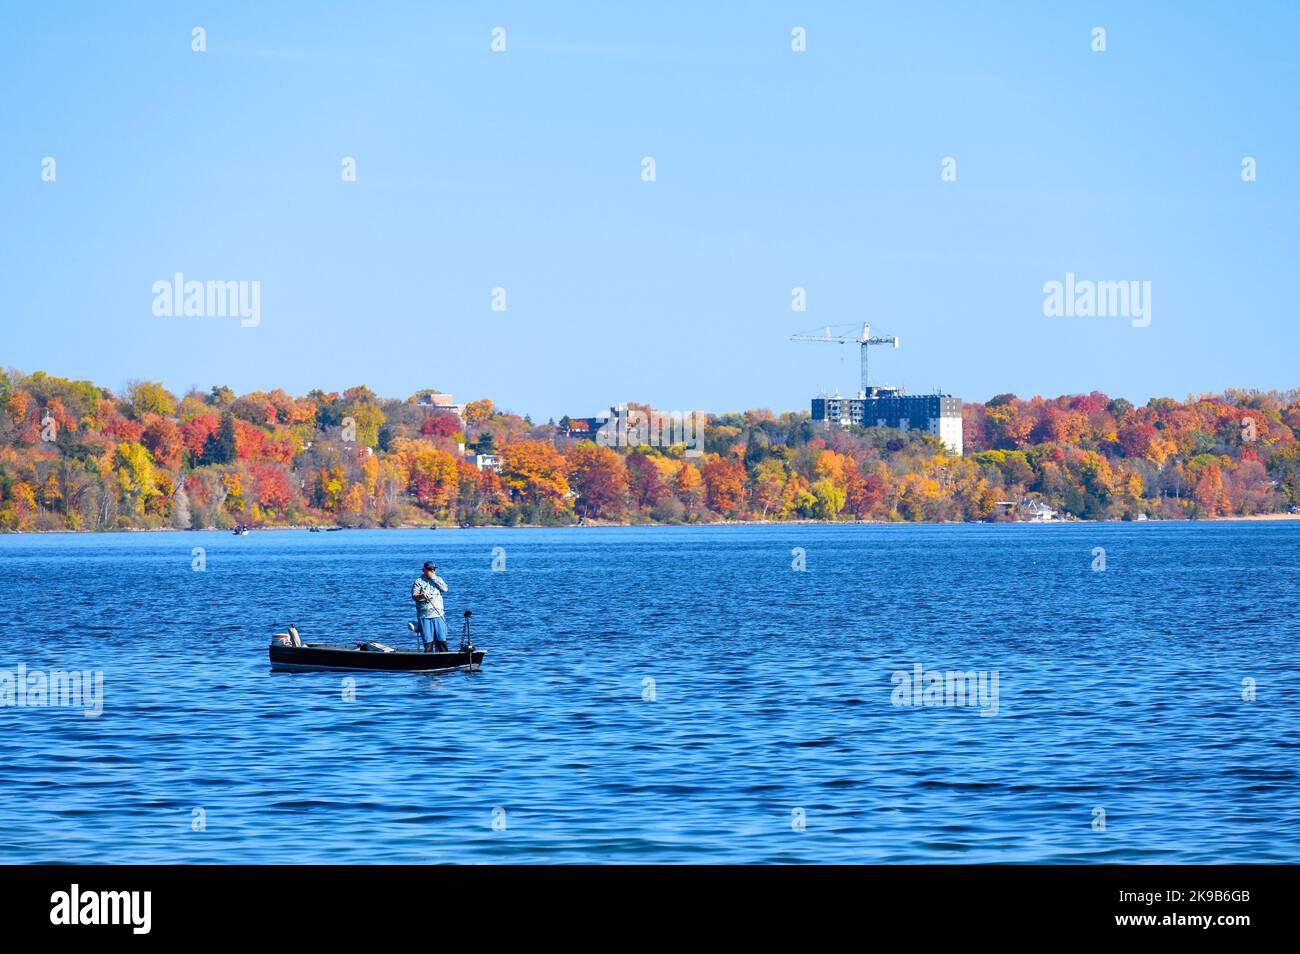 A man using a small boat to fish in Lake Simcoe. The autumn colors are seen in the background Stock Photo